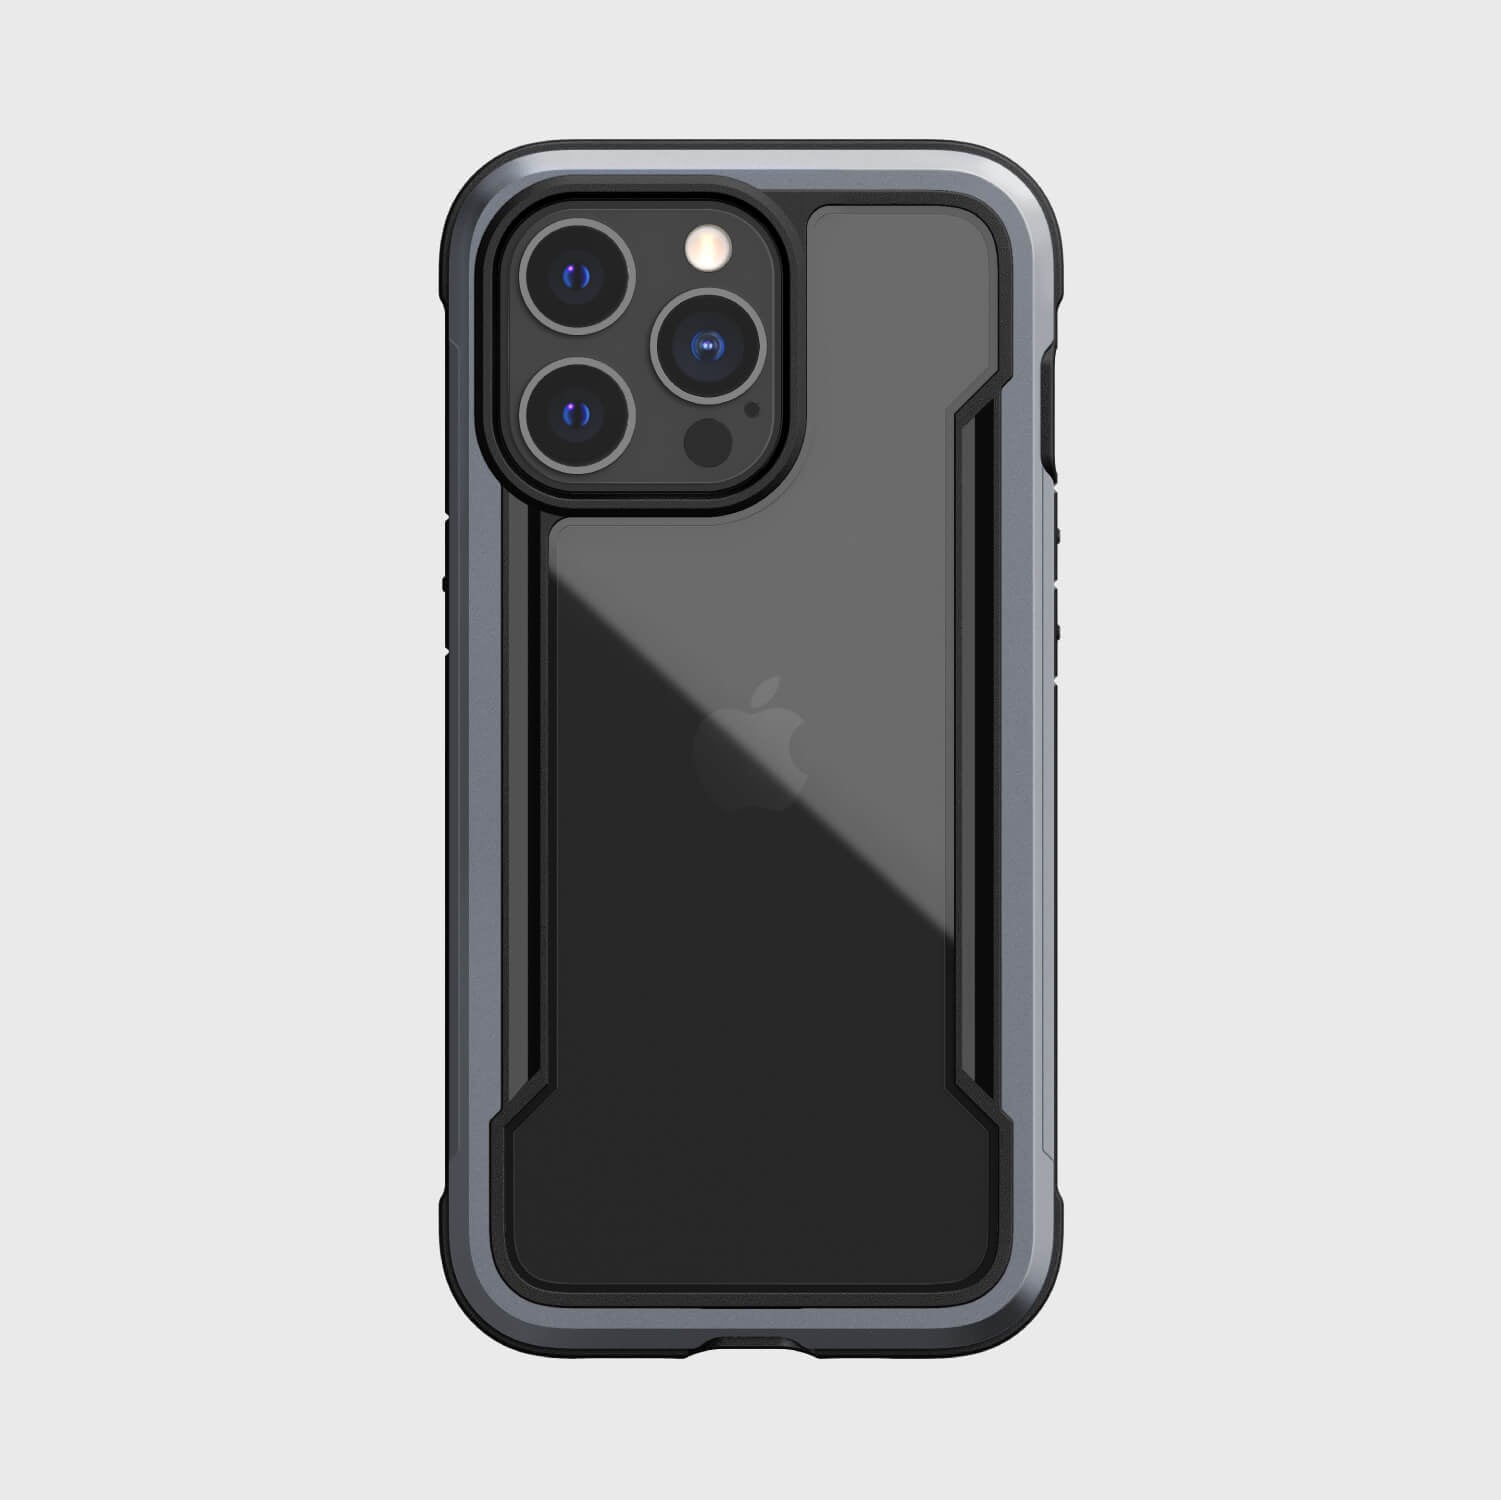 The back of an iPhone 13 Pro Max Case - SHIELD PRO by Raptic offering drop protection.